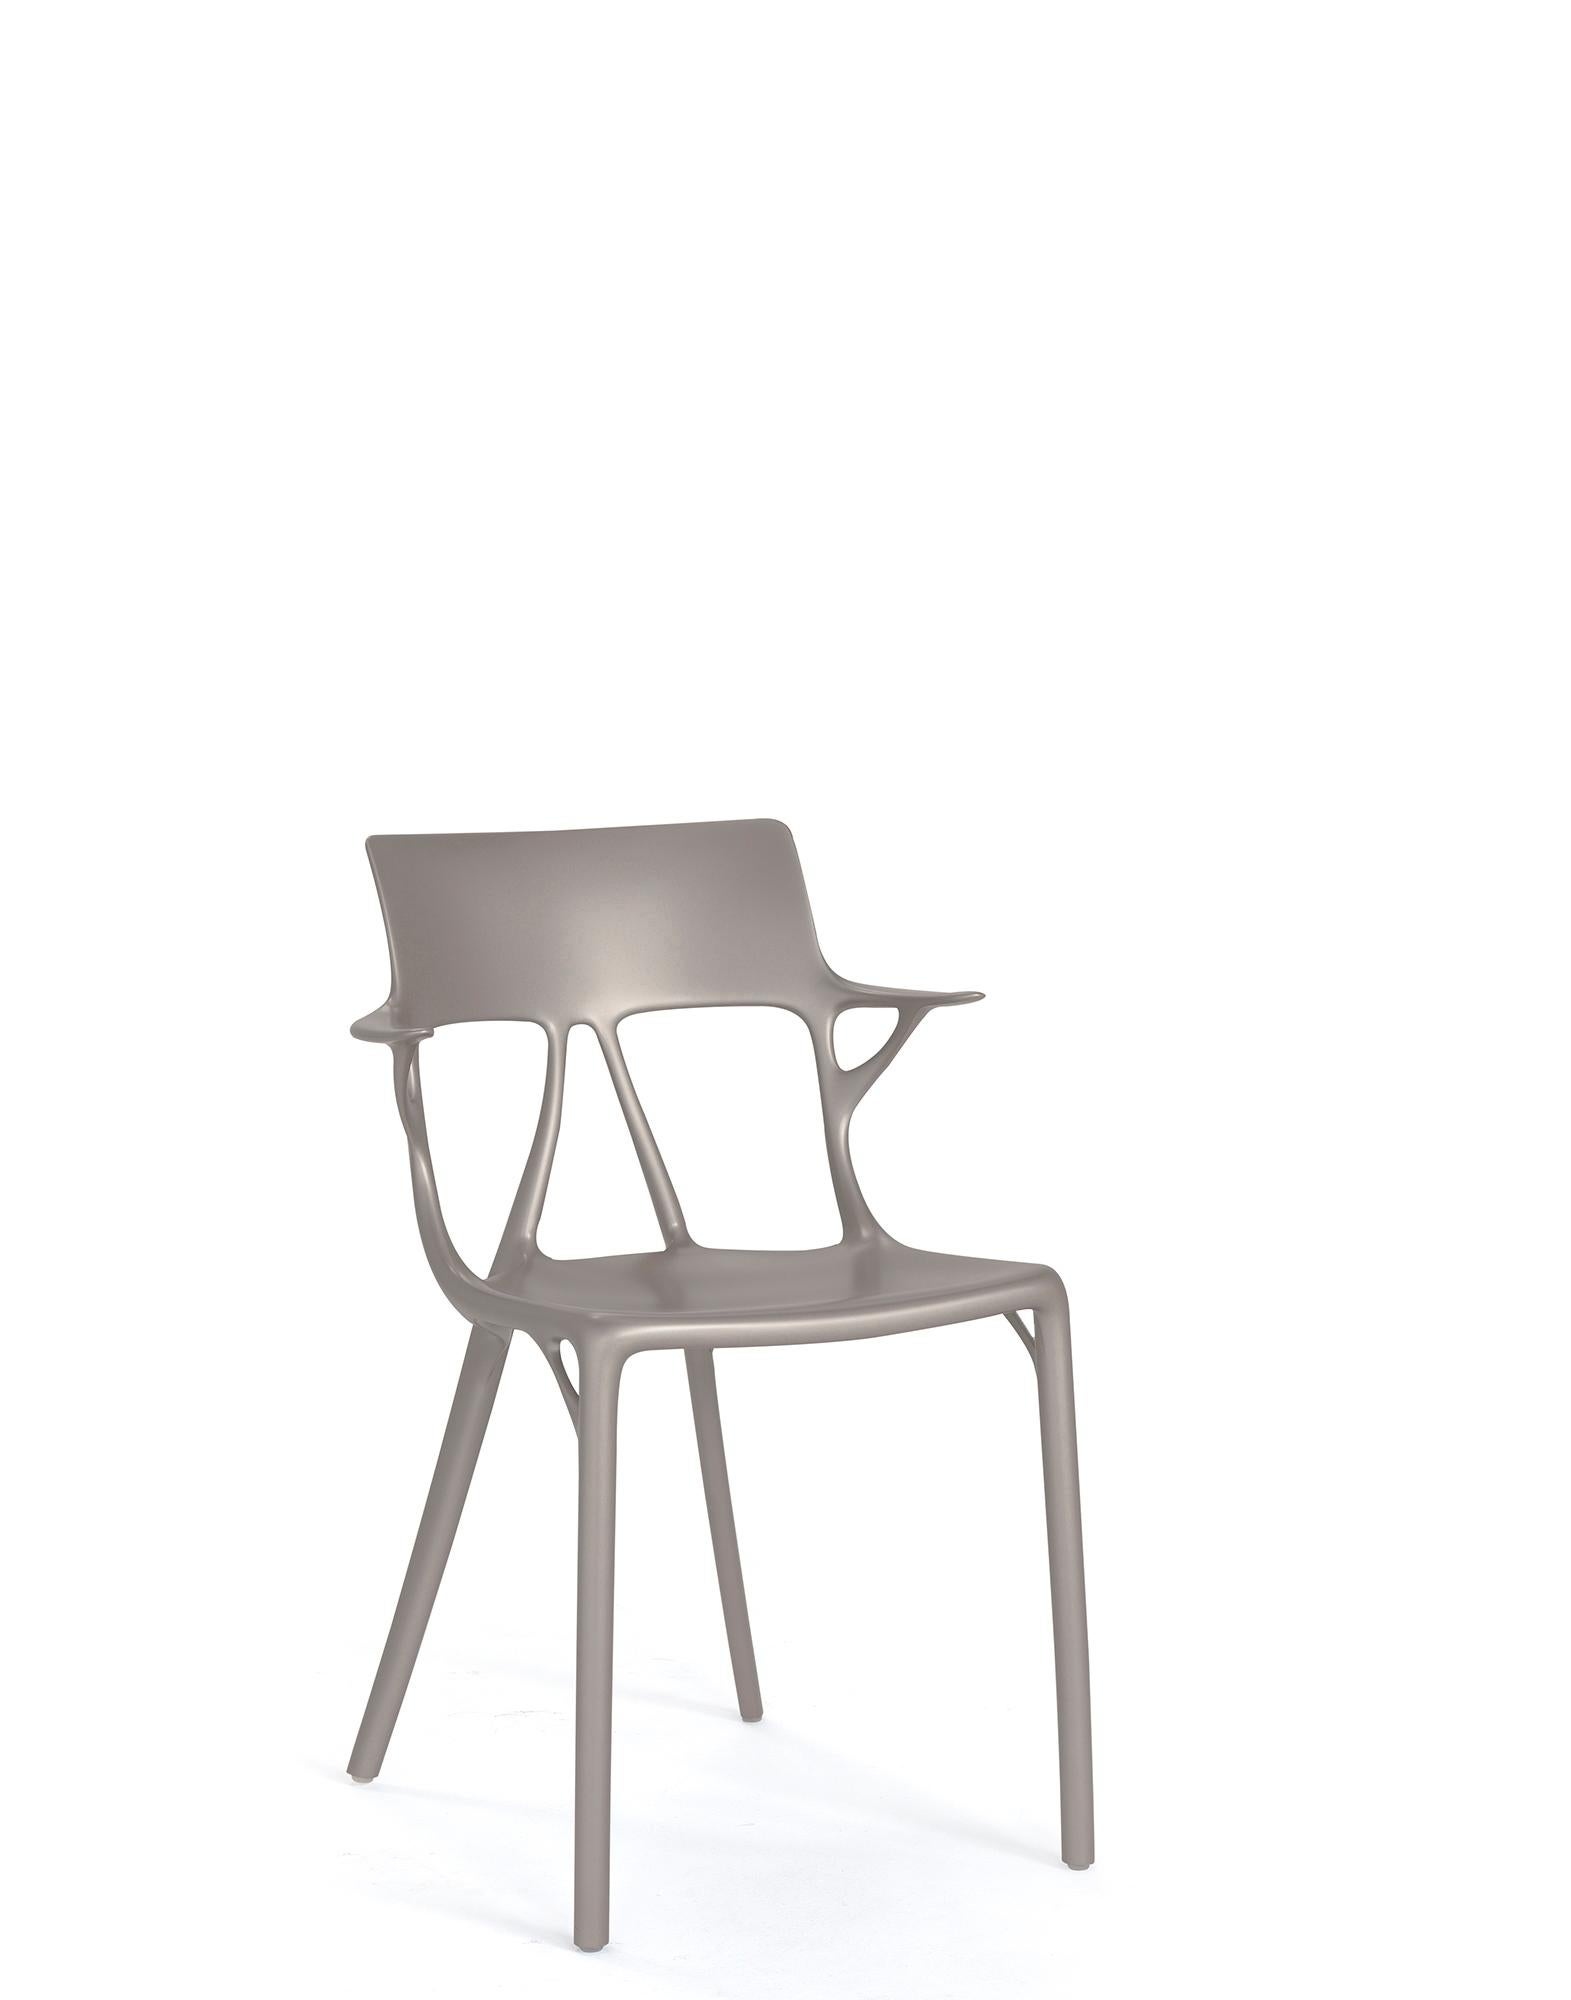 Kartell continues its ongoing commitment to sustainability with eco-friendly products which are part of the broader project expressed by the industrial manifesto Kartell loves the planet. 
A.I. is the chair created for the first time ever using